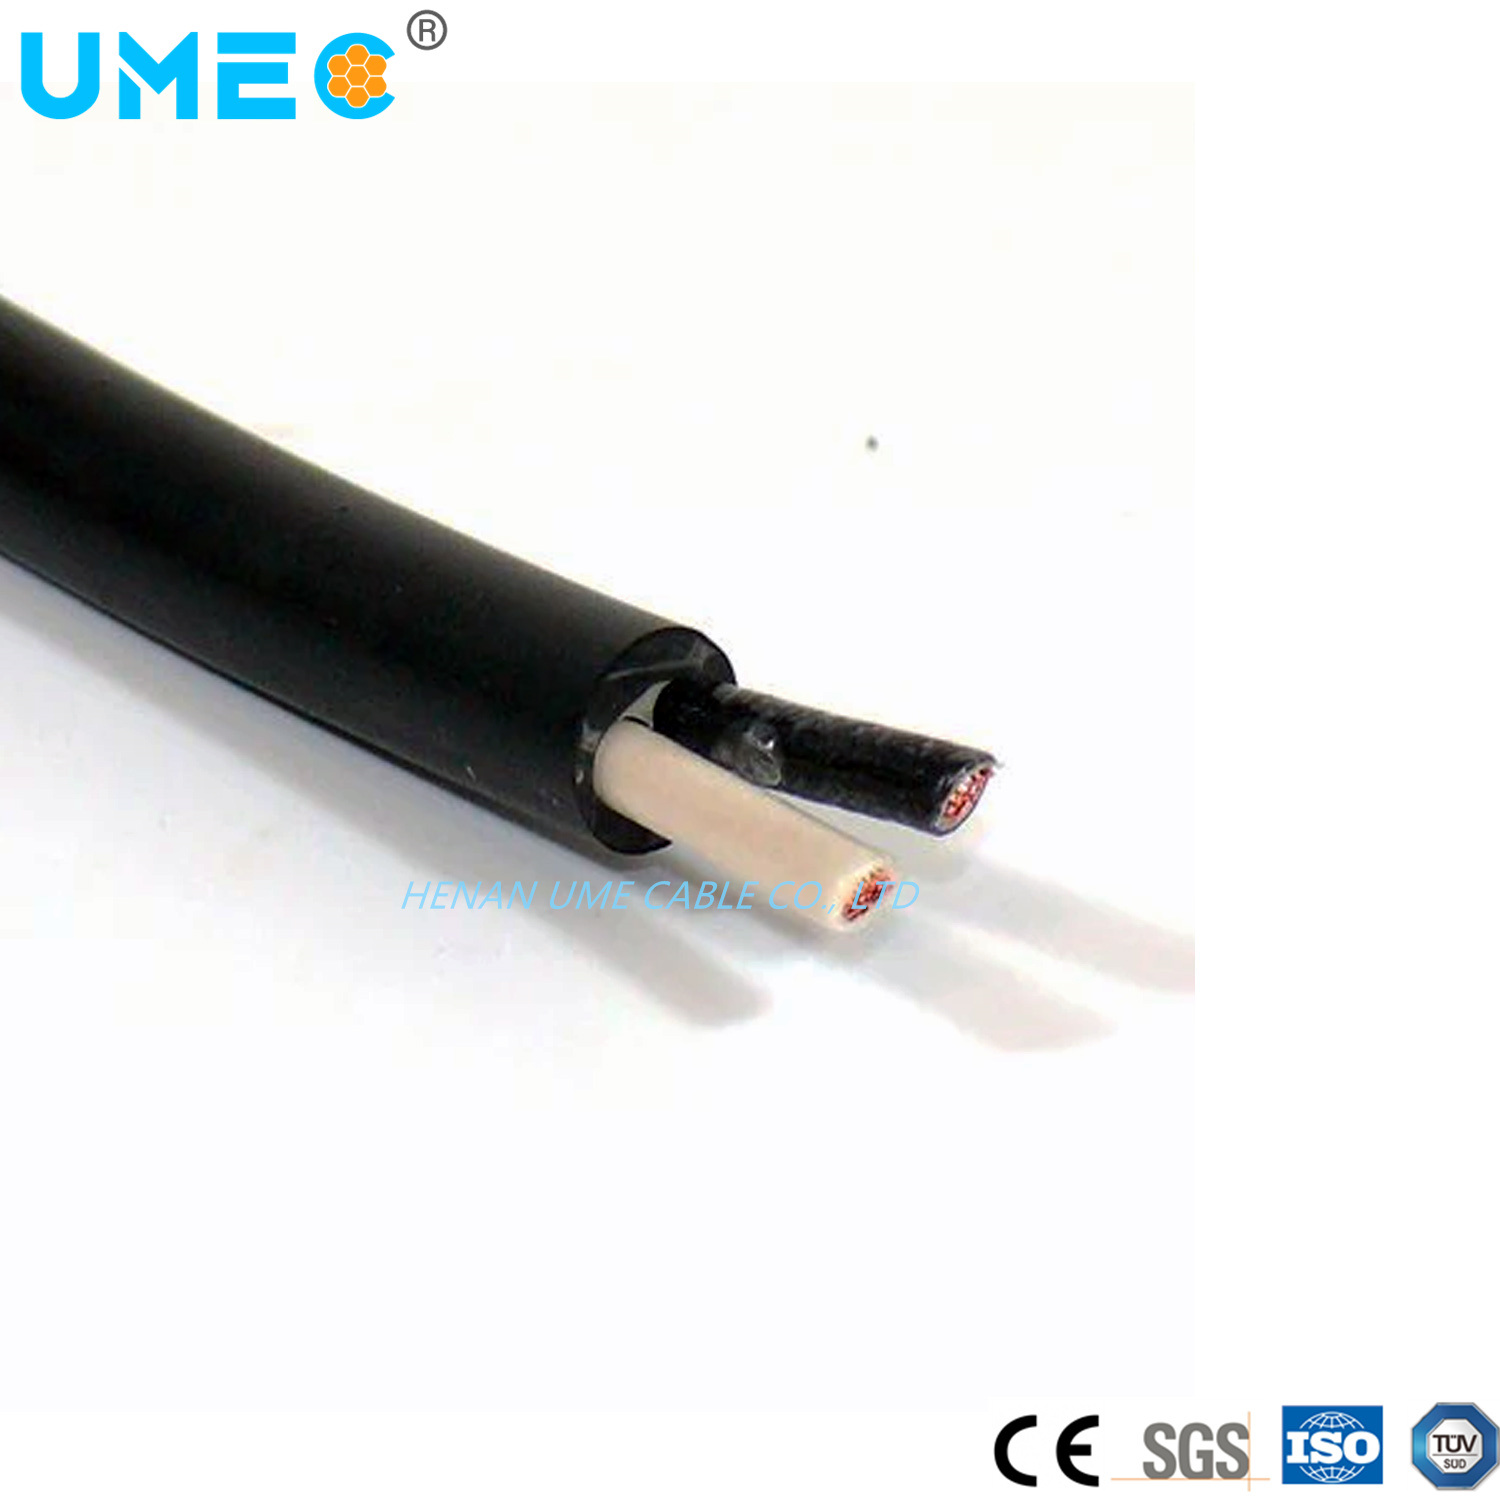 Multi-Core Round Flexible Cable PVC+Nylon Jacket Cable 2*20 AWG— 4*6 AWG Tsj Cable Wire